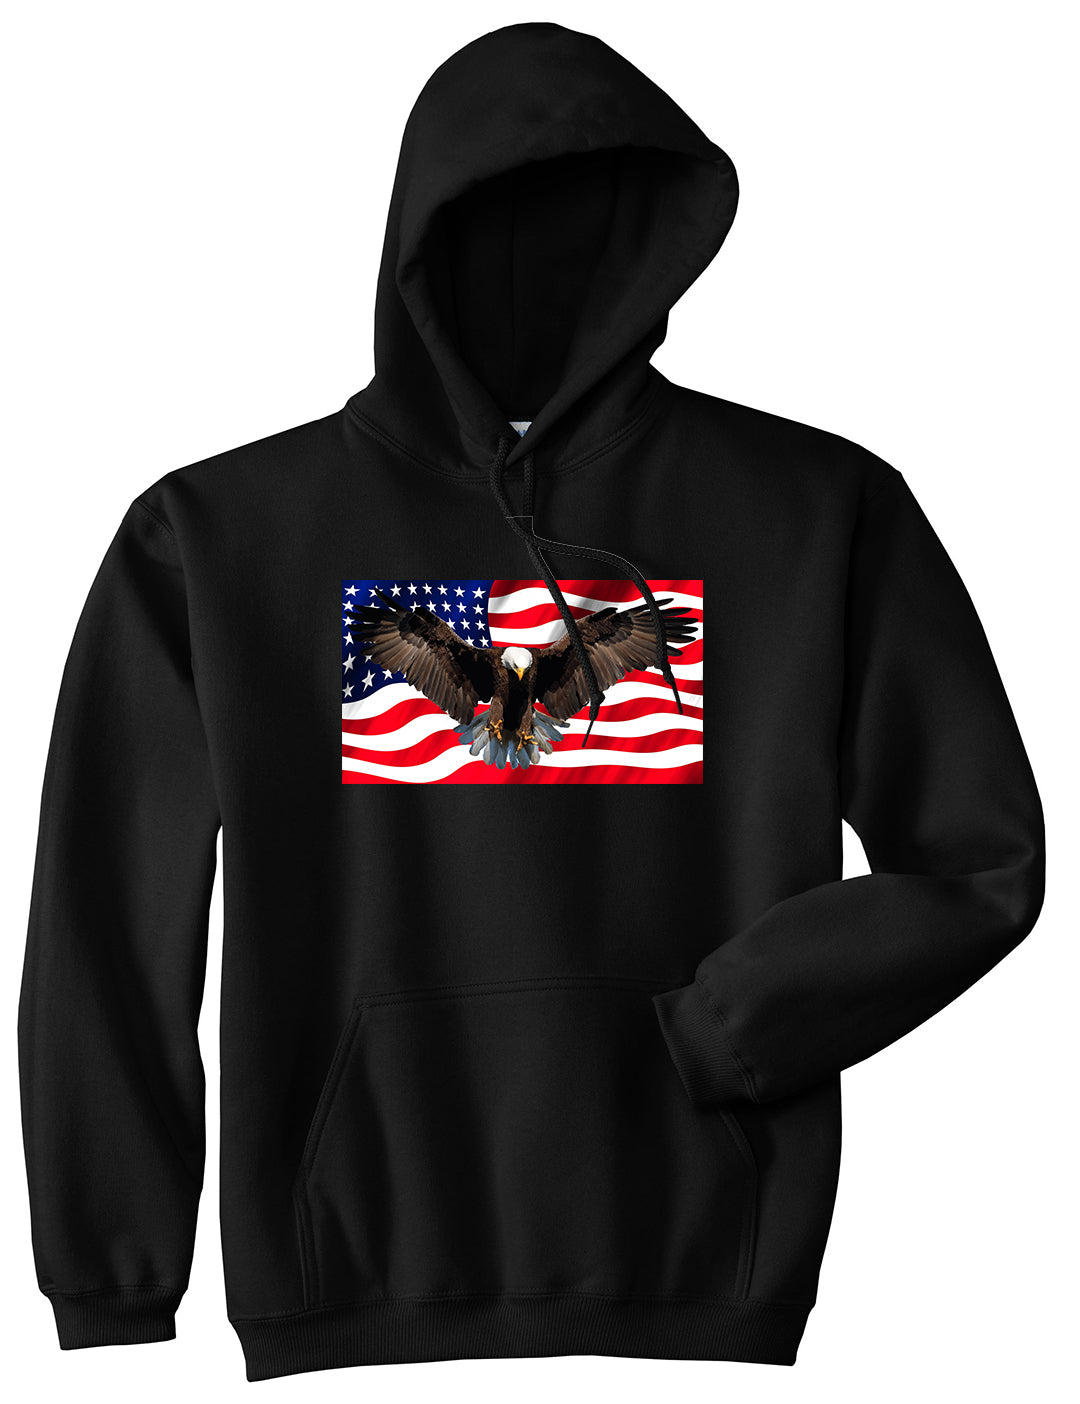 Bald Eagle American Flag Black Pullover Hoodie by Kings Of NY